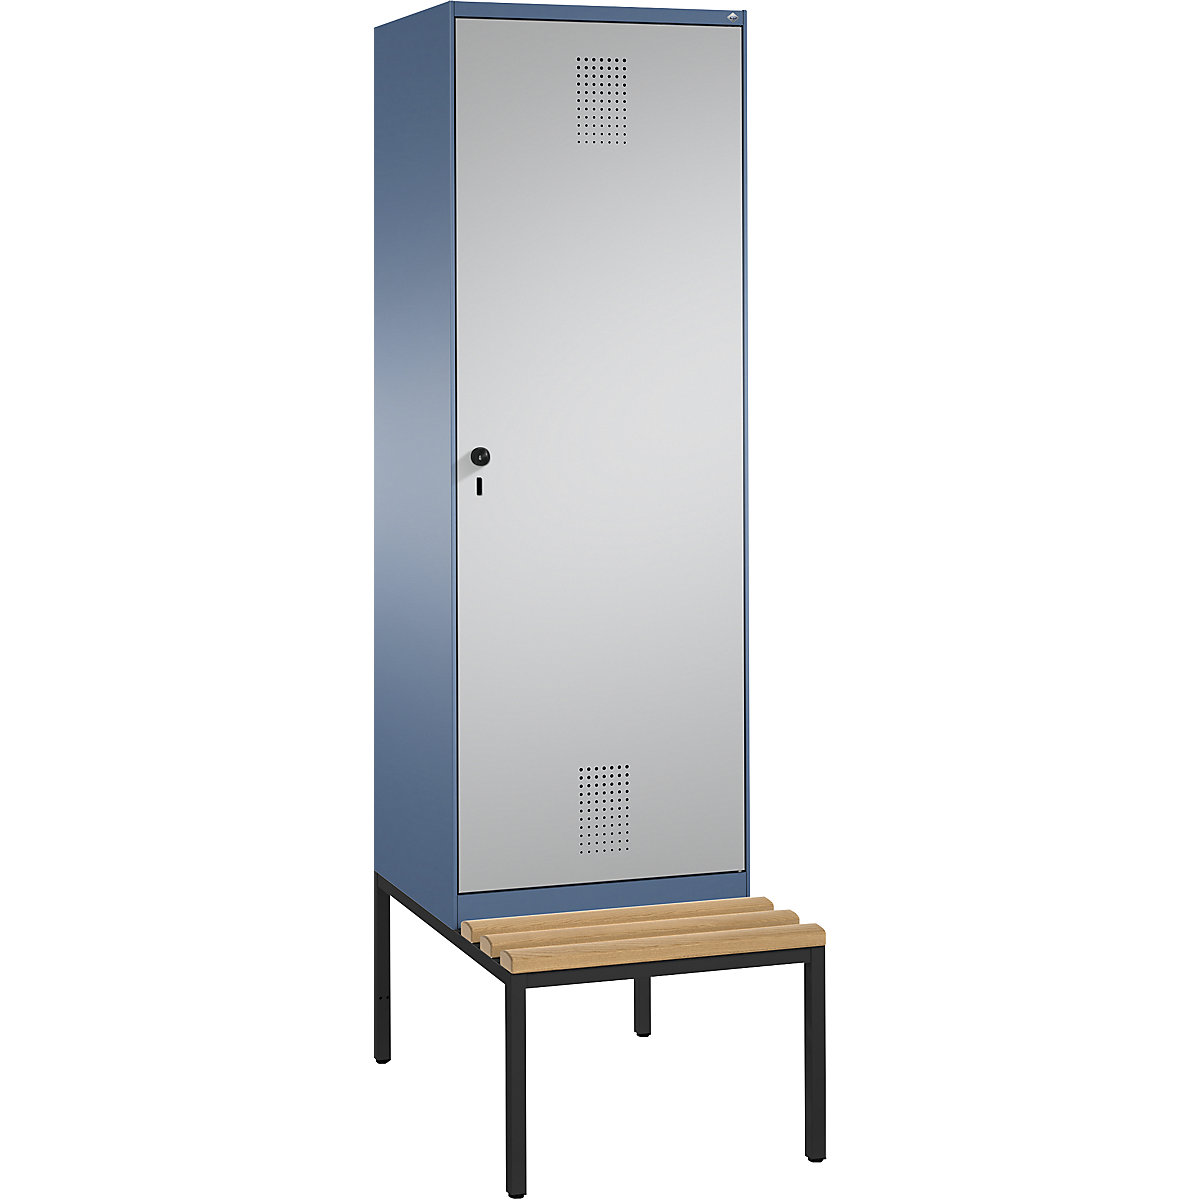 EVOLO cloakroom locker, with bench, door for 2 compartments – C+P, 2 compartments, 1 door, compartment width 300 mm, distant blue / white aluminium-8